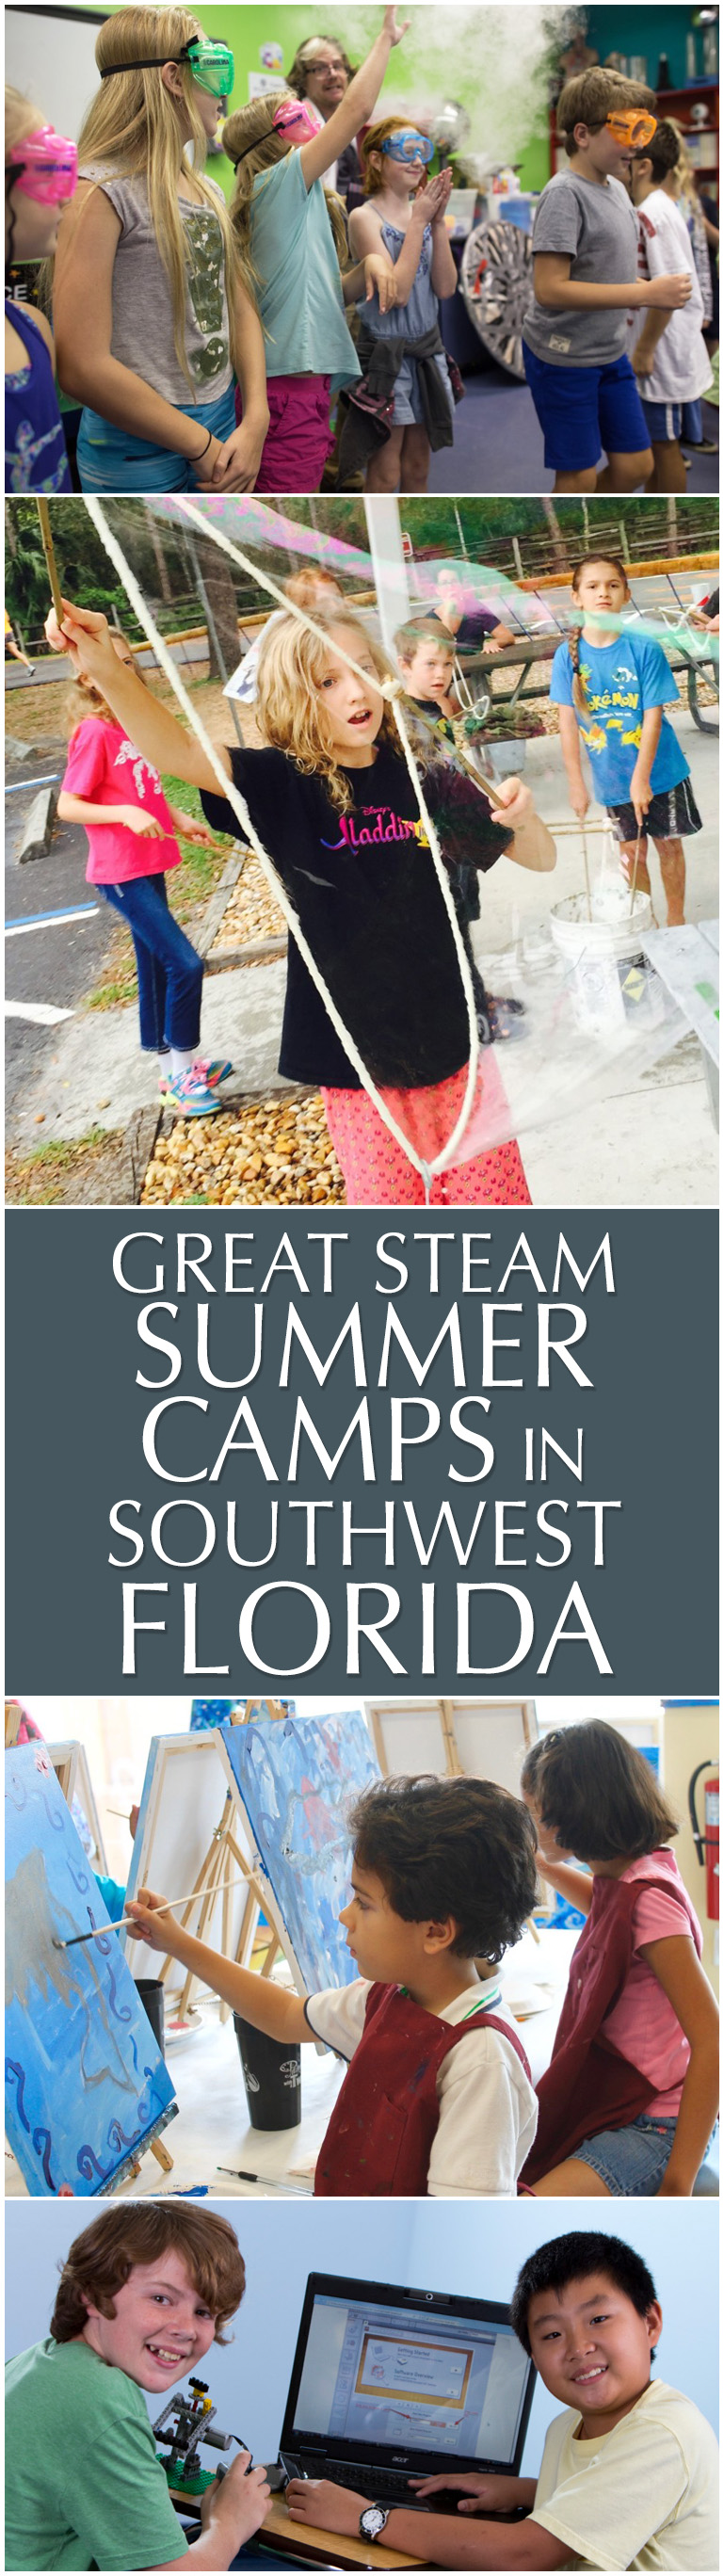 Great STEAM summer camps in Southwest Florida